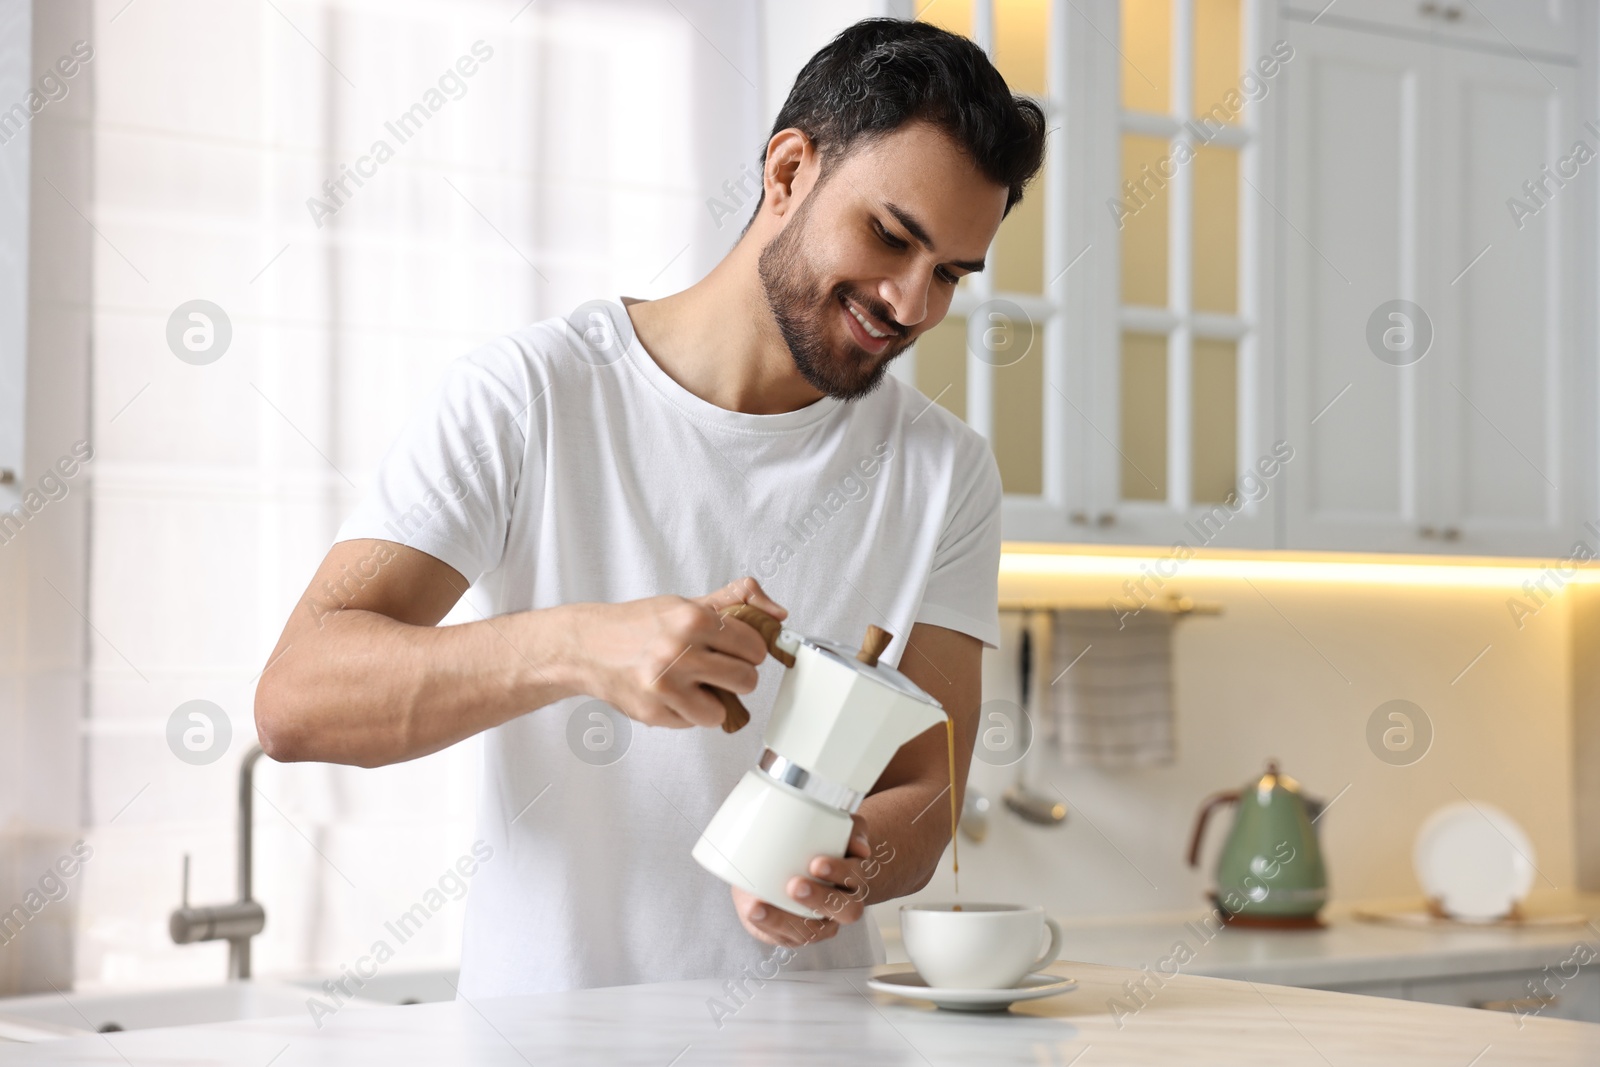 Photo of Morning of happy man pouring coffee from moka pot into cup at table in kitchen